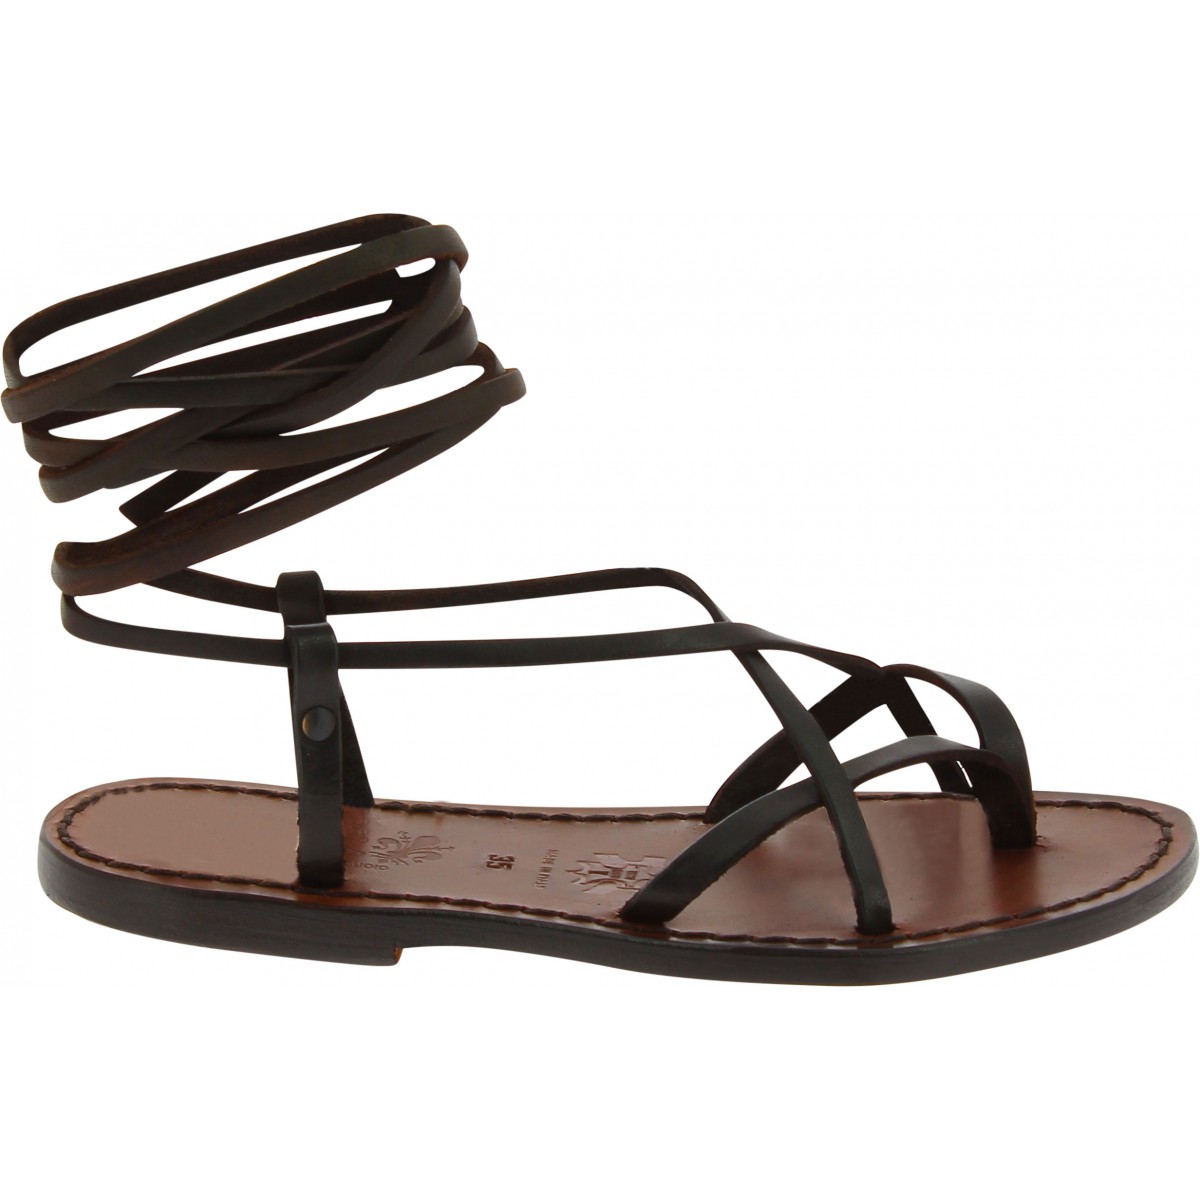 Dark brown leather flat strappy sandals handmade in Italy | The leather ...